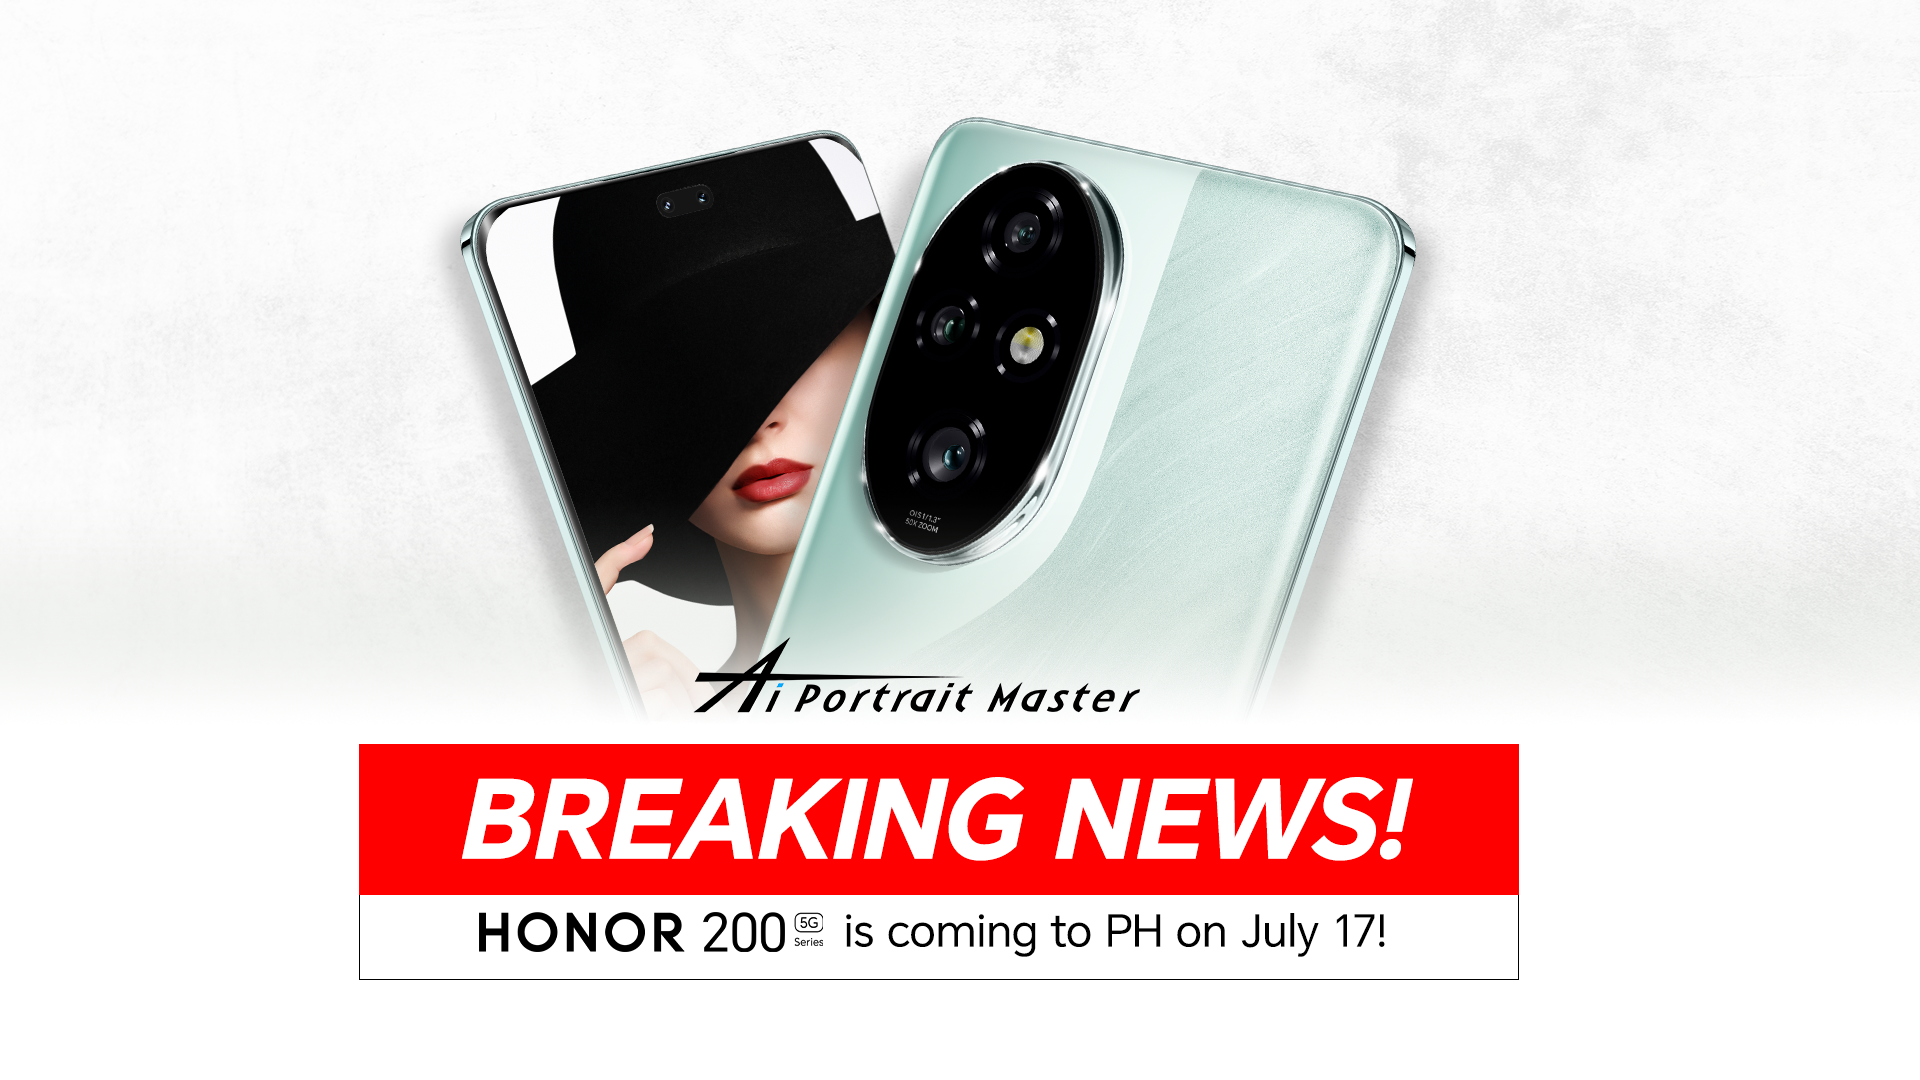 Breaking News: The AI Portrait Master HONOR 200 Series is coming to PH on July 17!